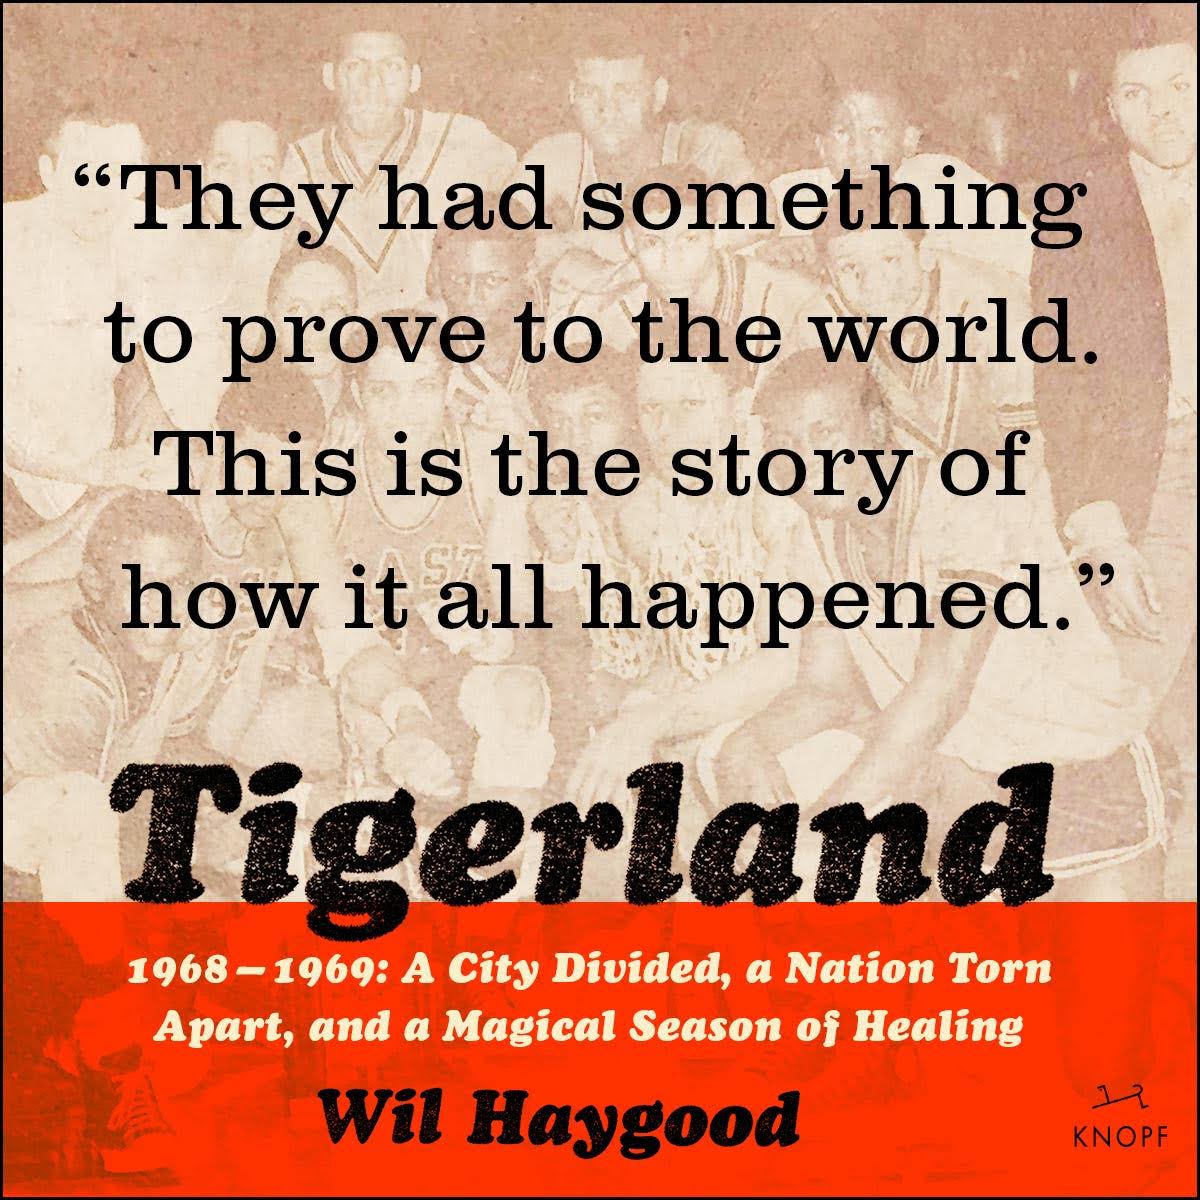 They had something to prove to the world. This is the story of how it all happened. Tigerland 1968-1969: A City Divided, a Nation Torn Apart, and a Magical Season. By Wil Haygood.